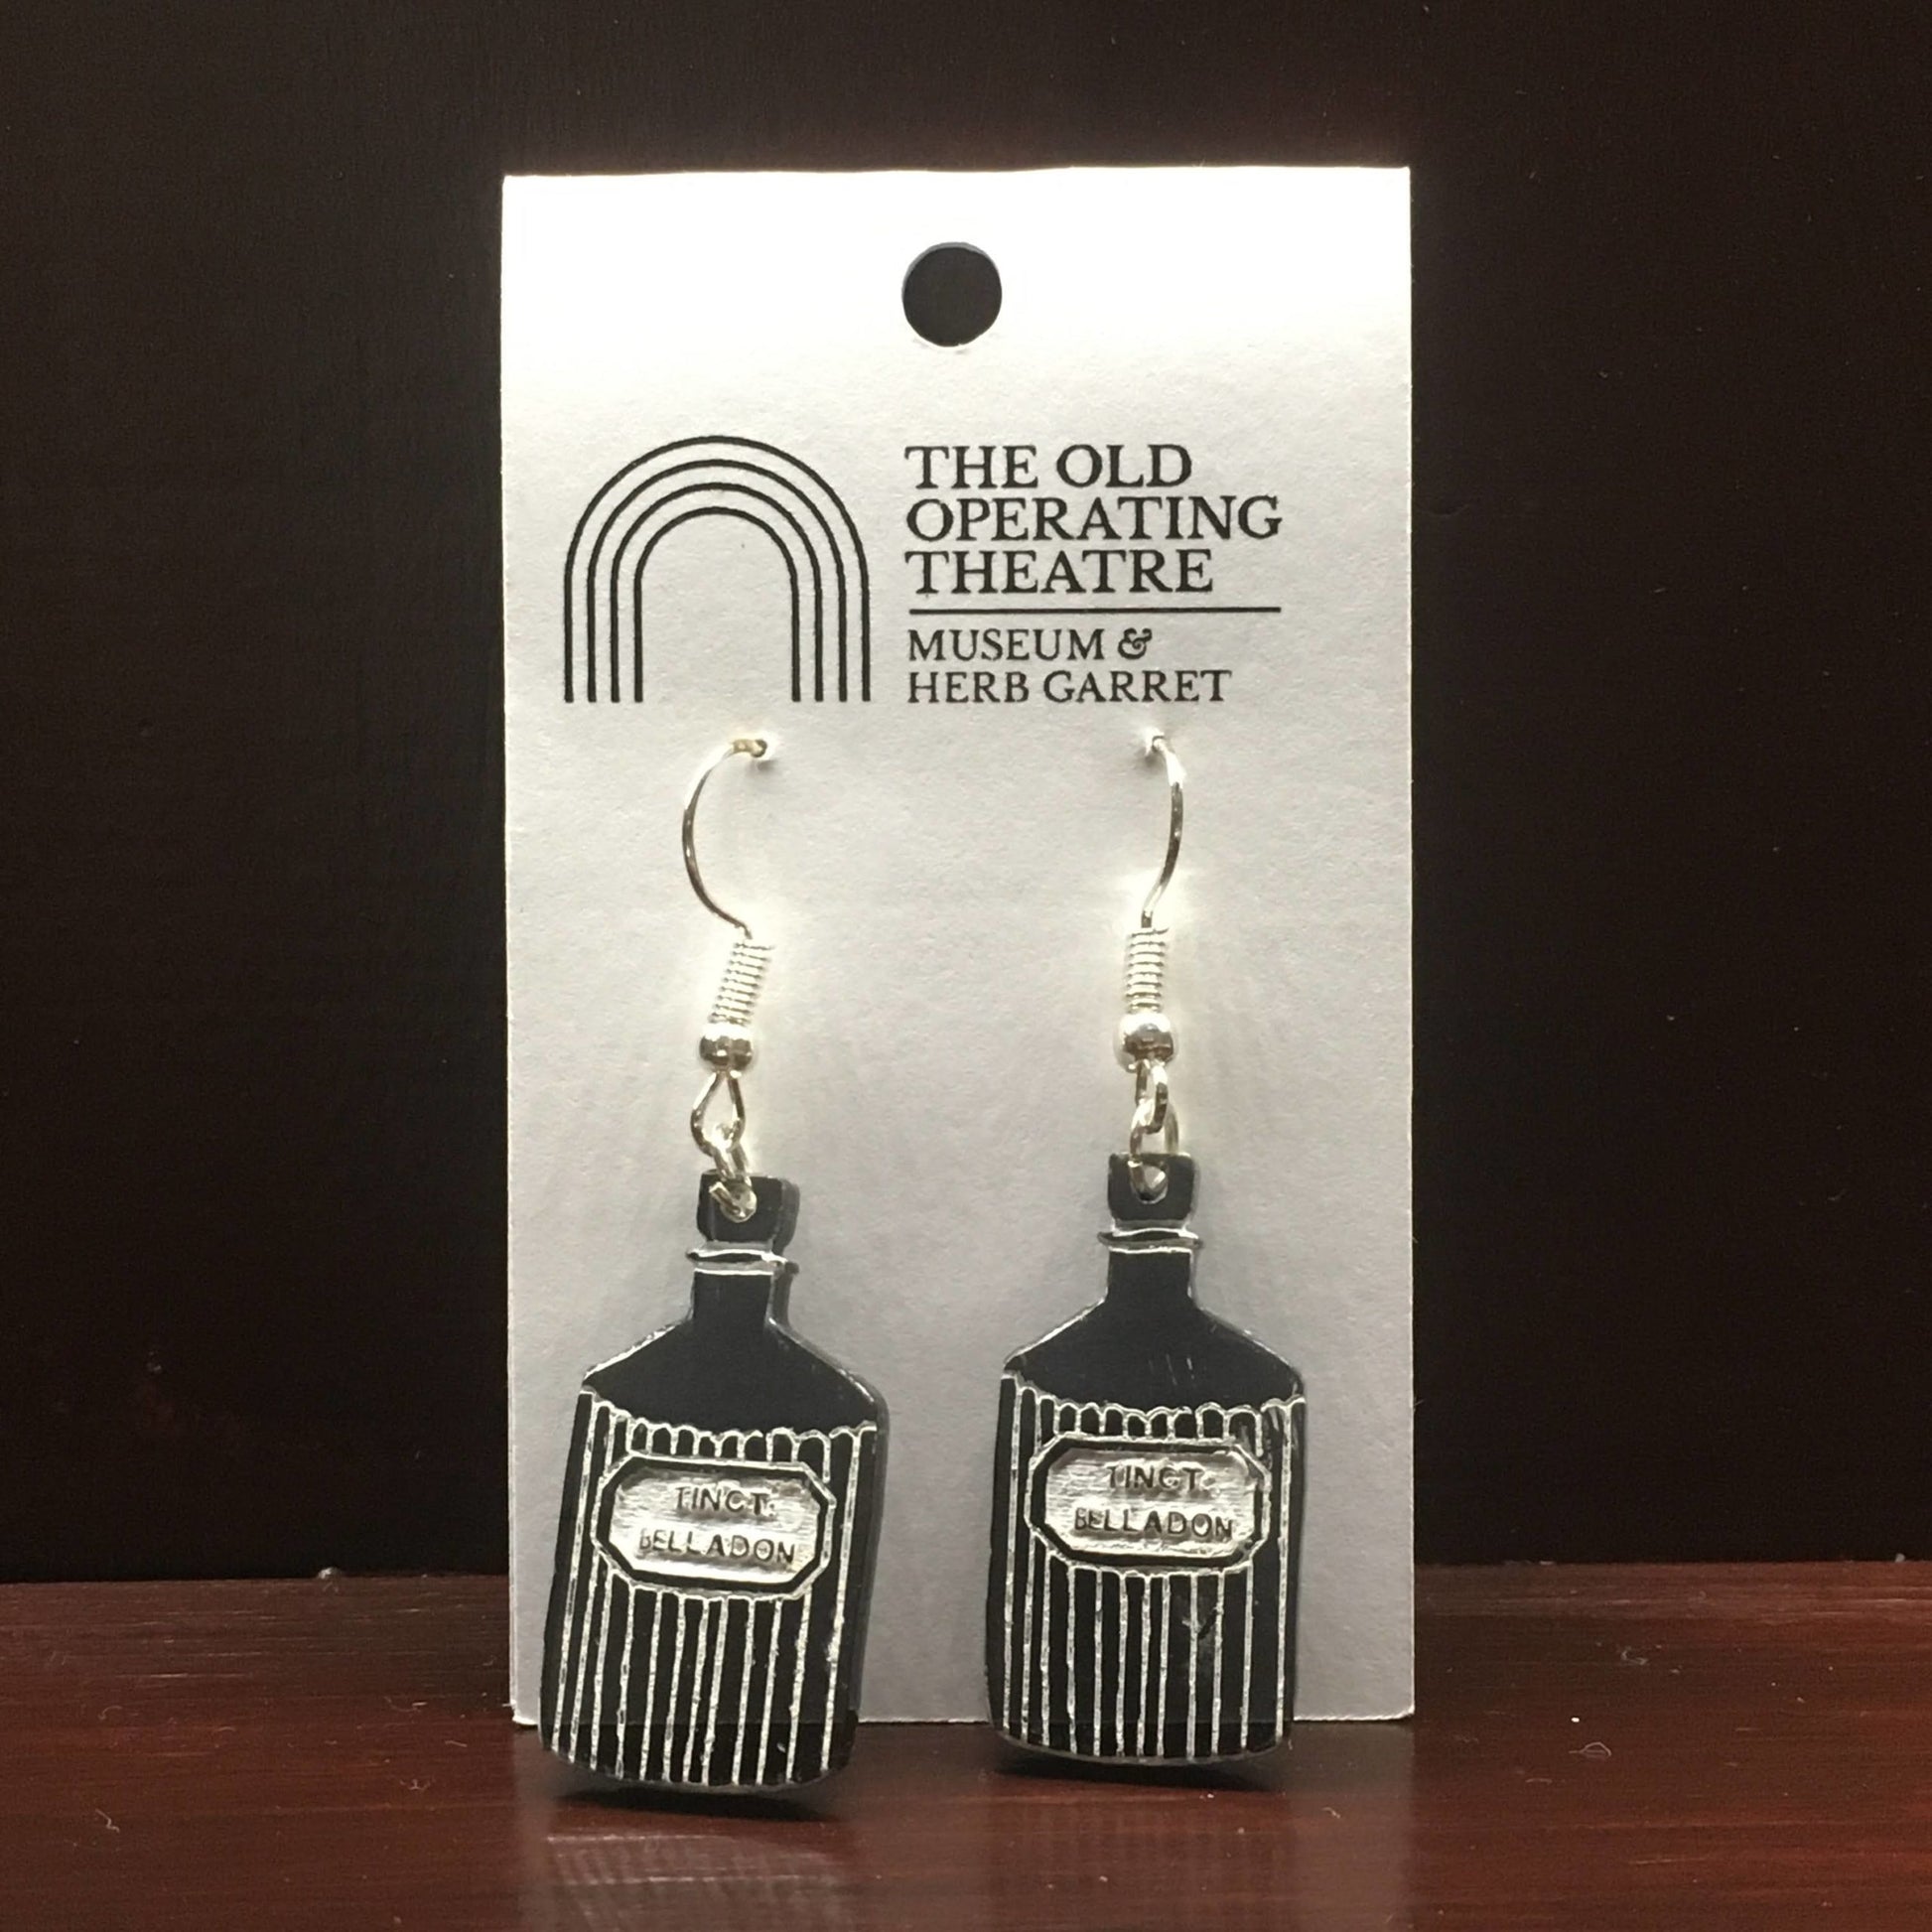 Pair of black dangle earrings in the shape of a bottle with the label 'tinct. belladon'